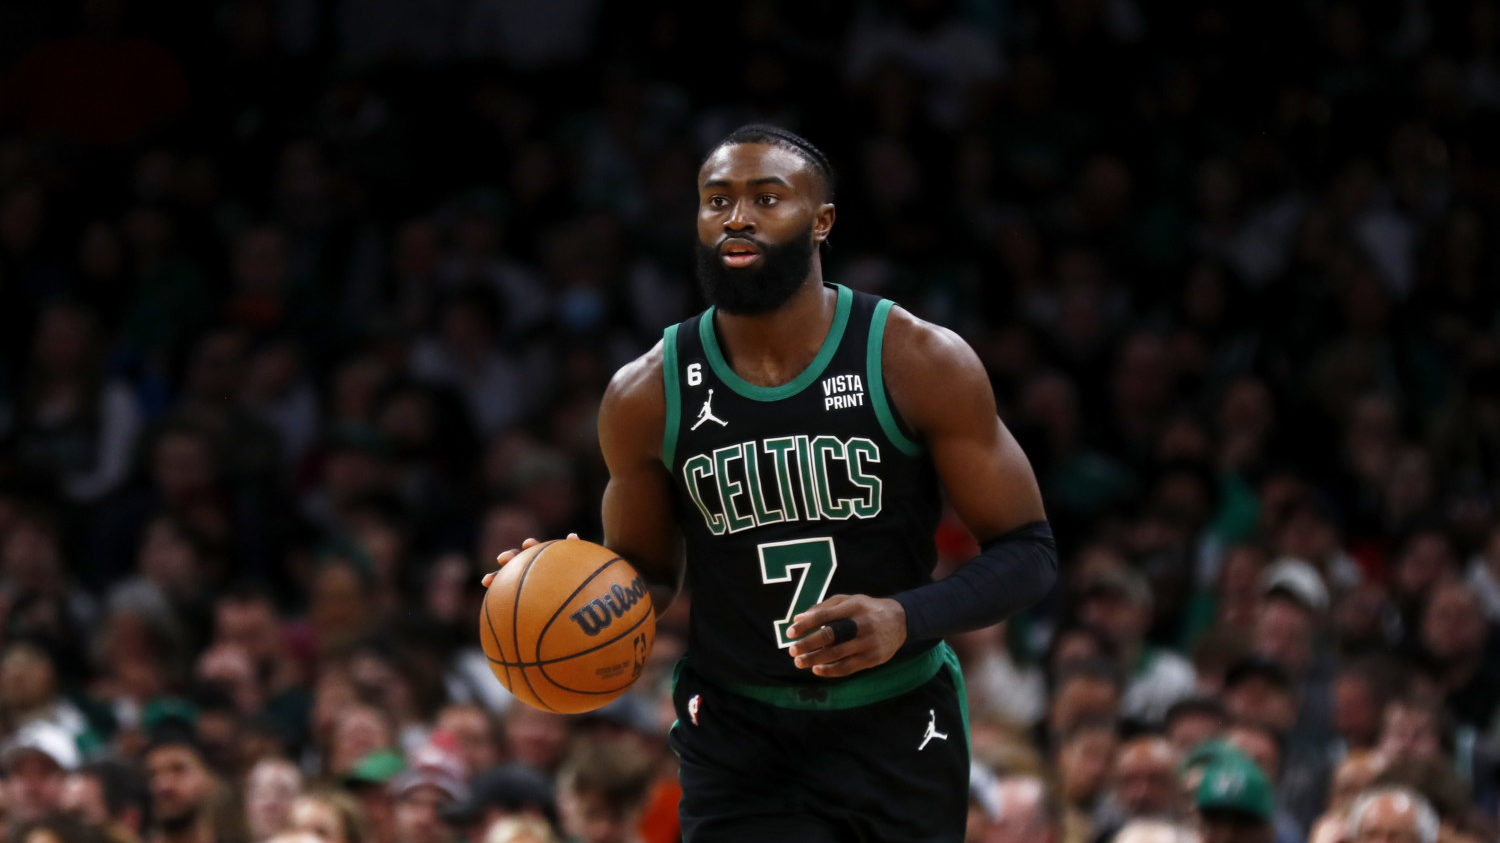 Discover more about Jaylen Brown, including his career stats, current deal, and more.